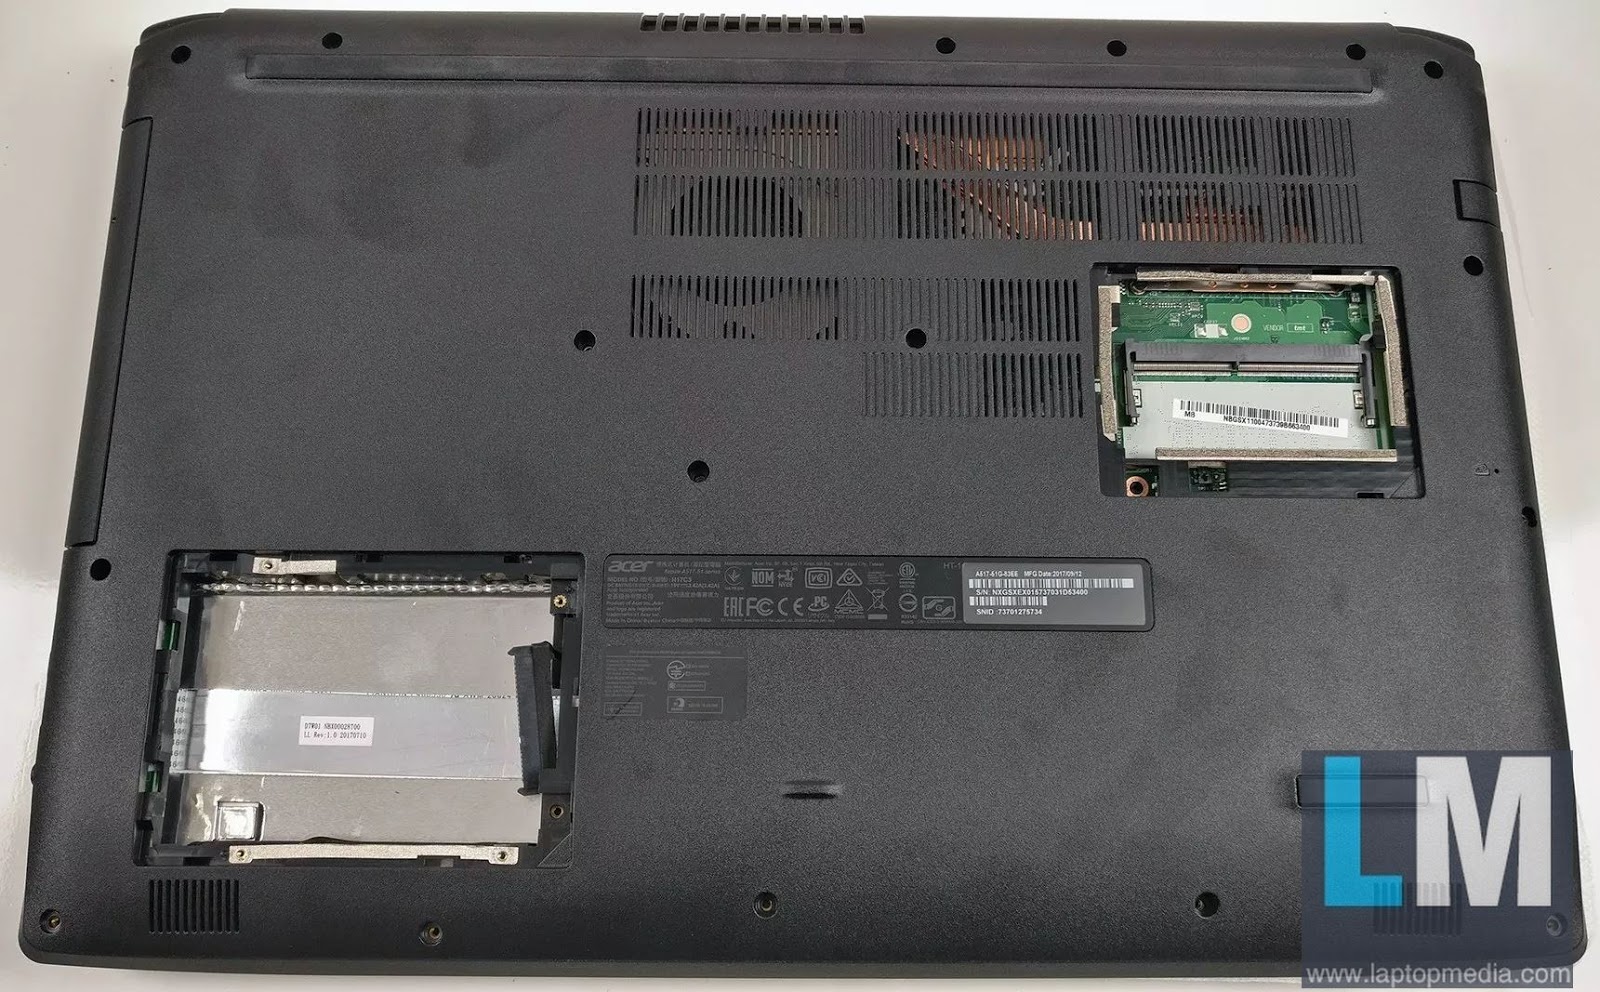 Aspire a517 51g. Acer Aspire 5 a517-51g. Acer Aspire a517-51 Series. Acer Aspire 3 снизу. A517-51g.